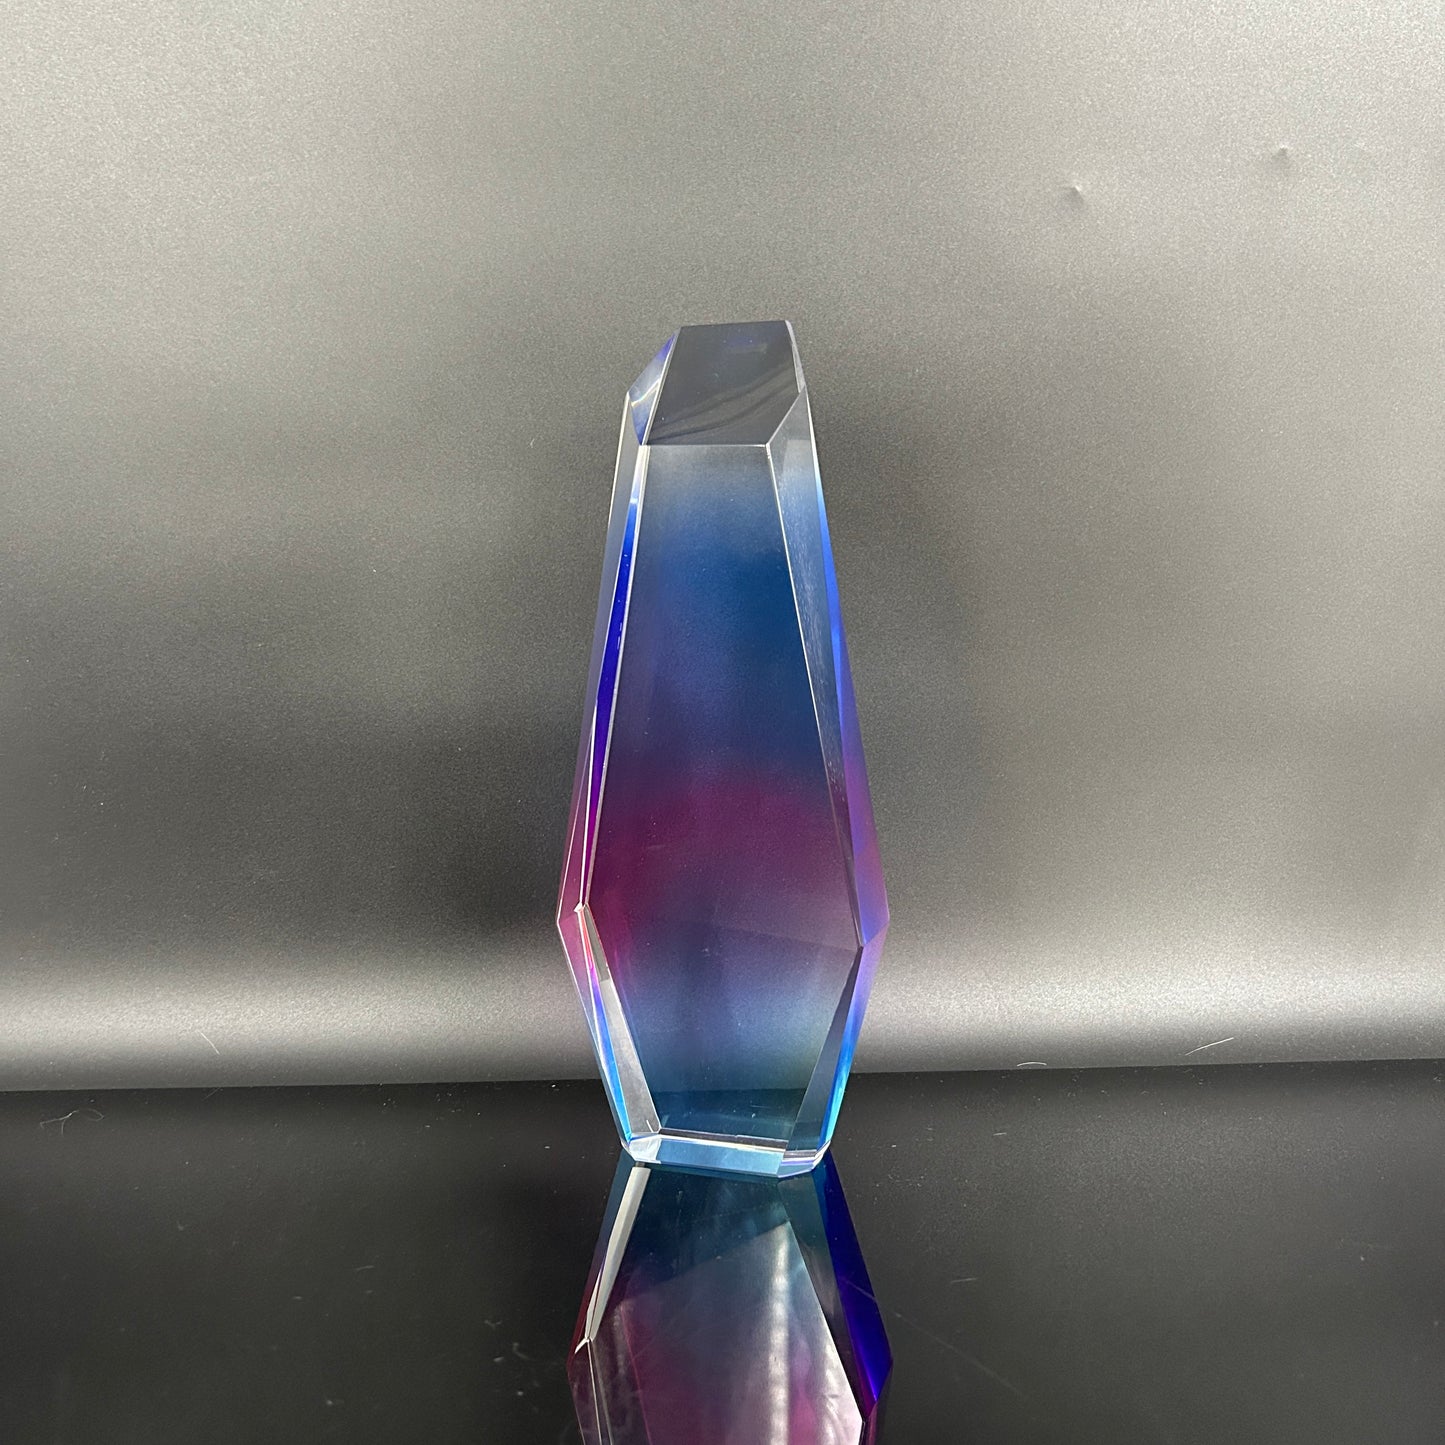 Prism Crown Achievement Award with Radiant Colors